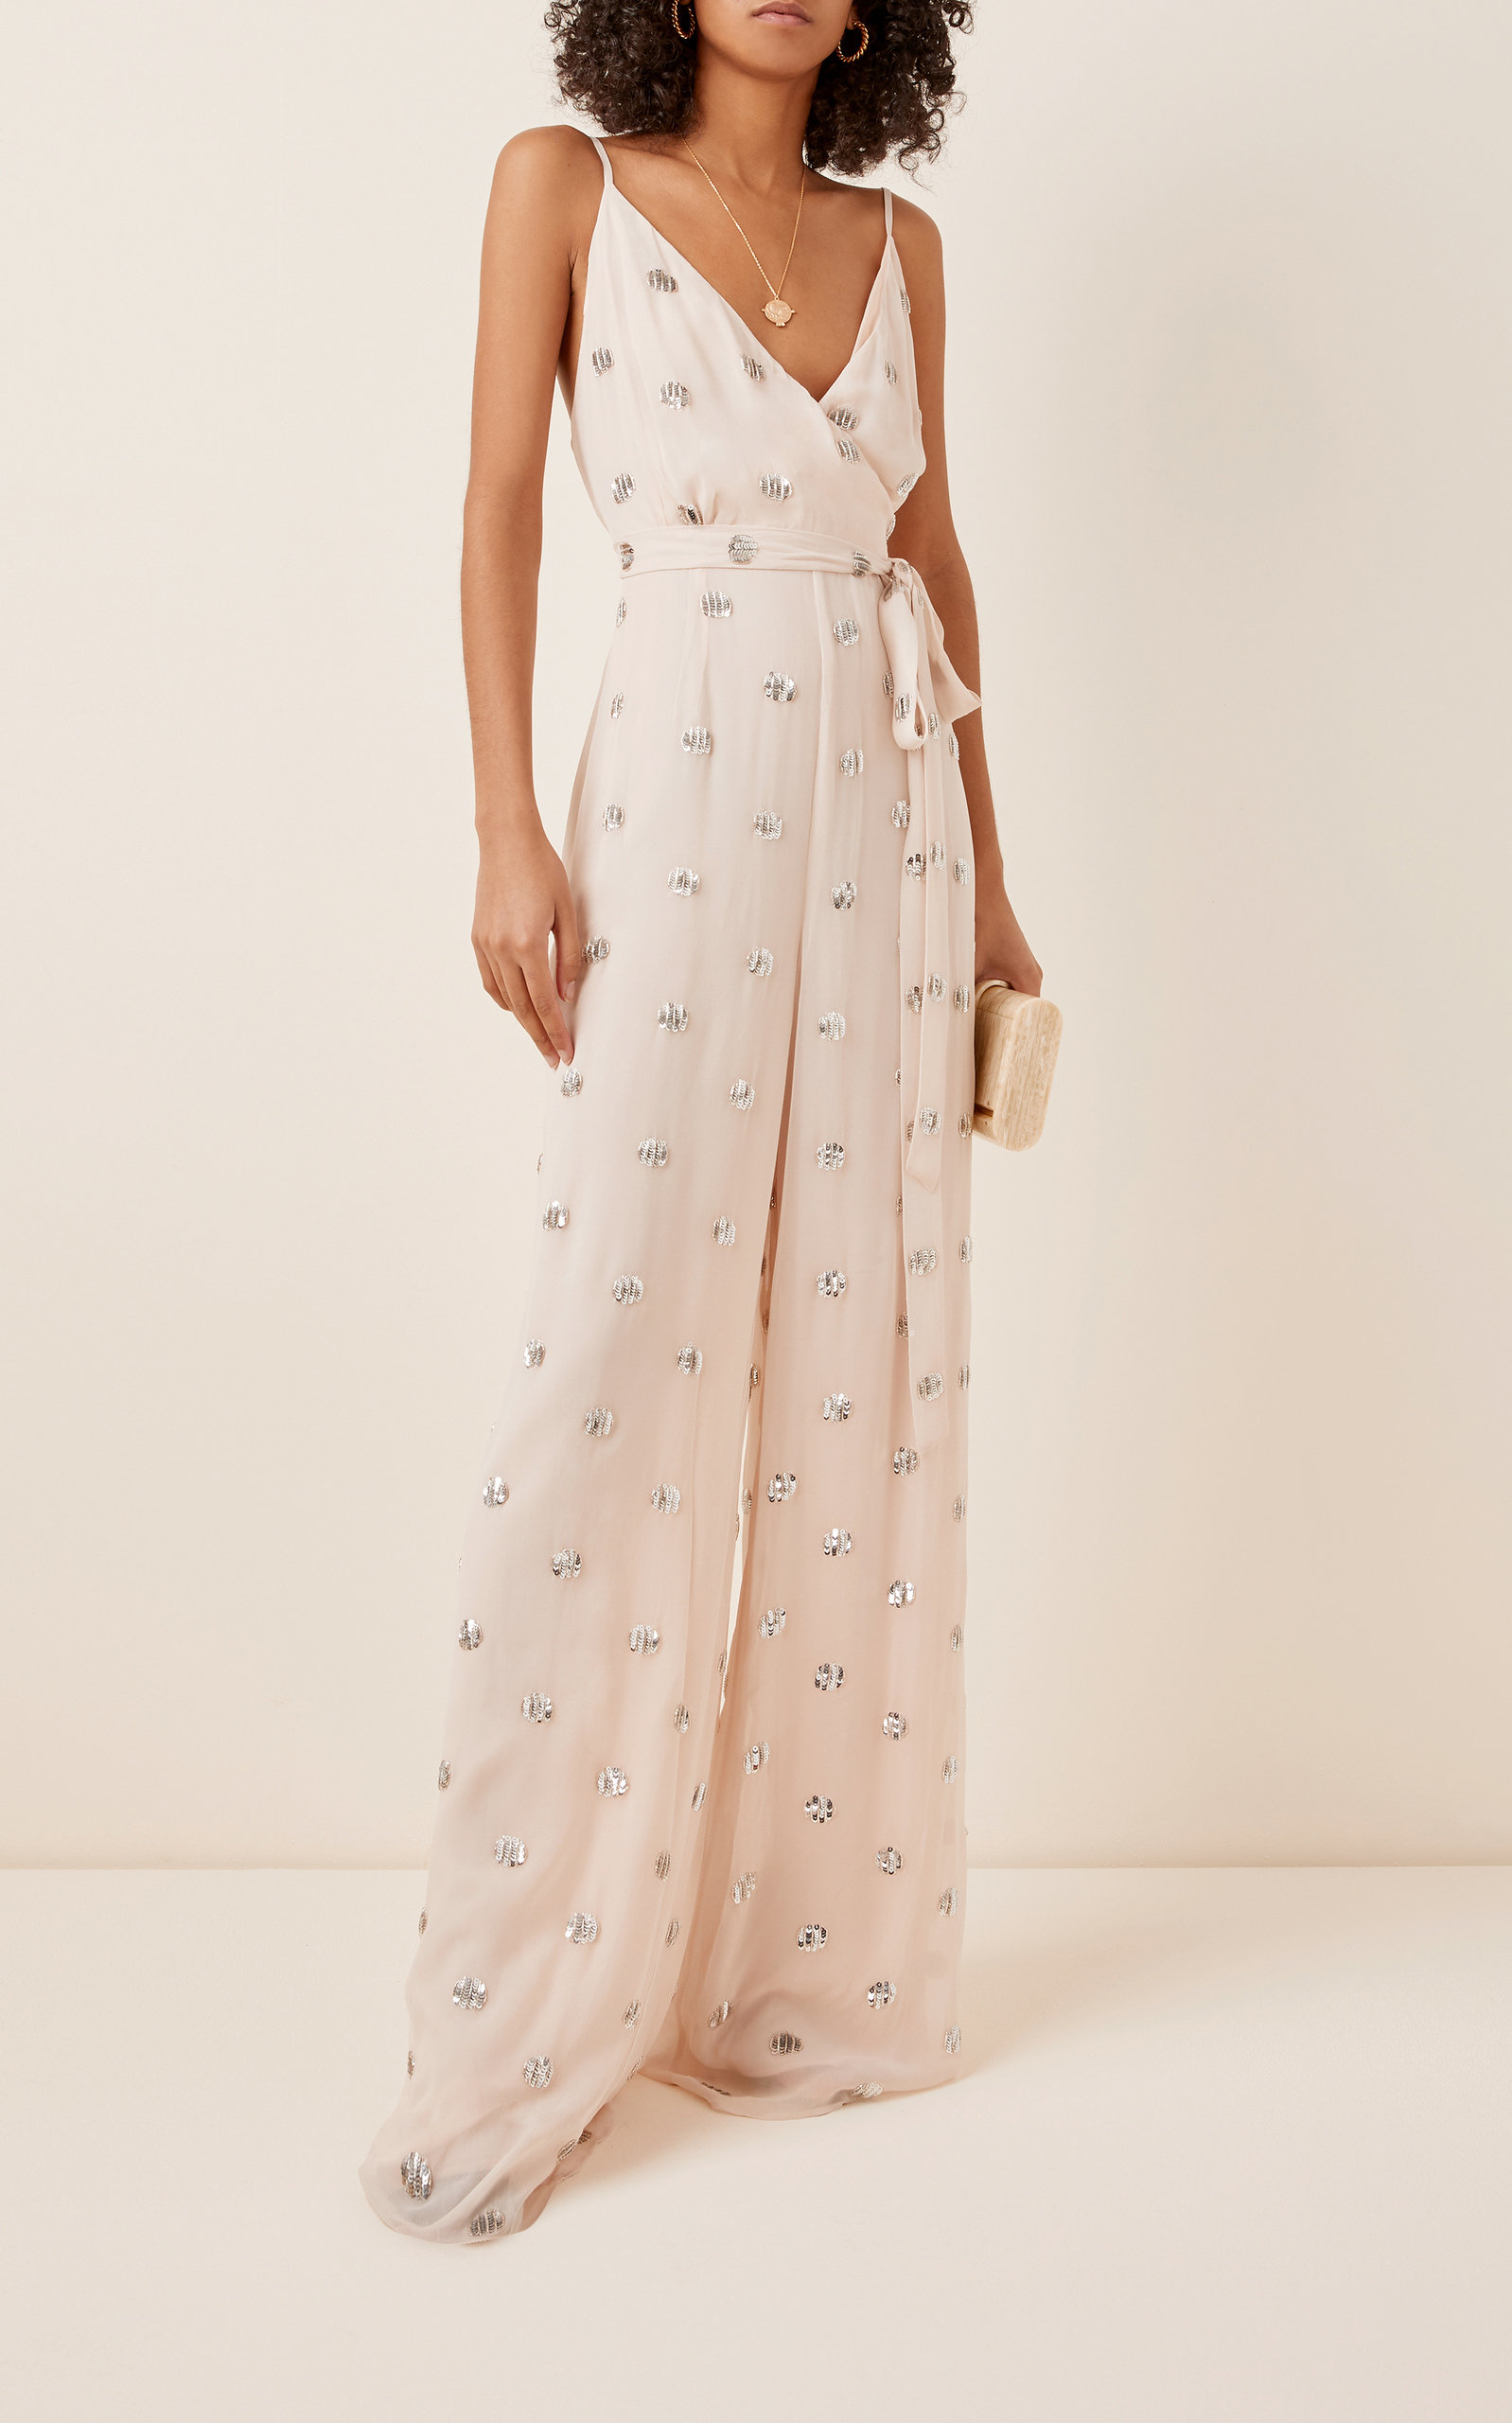 The perfect blush color and decorated with the prettiest sequin-embroidered polka dots.